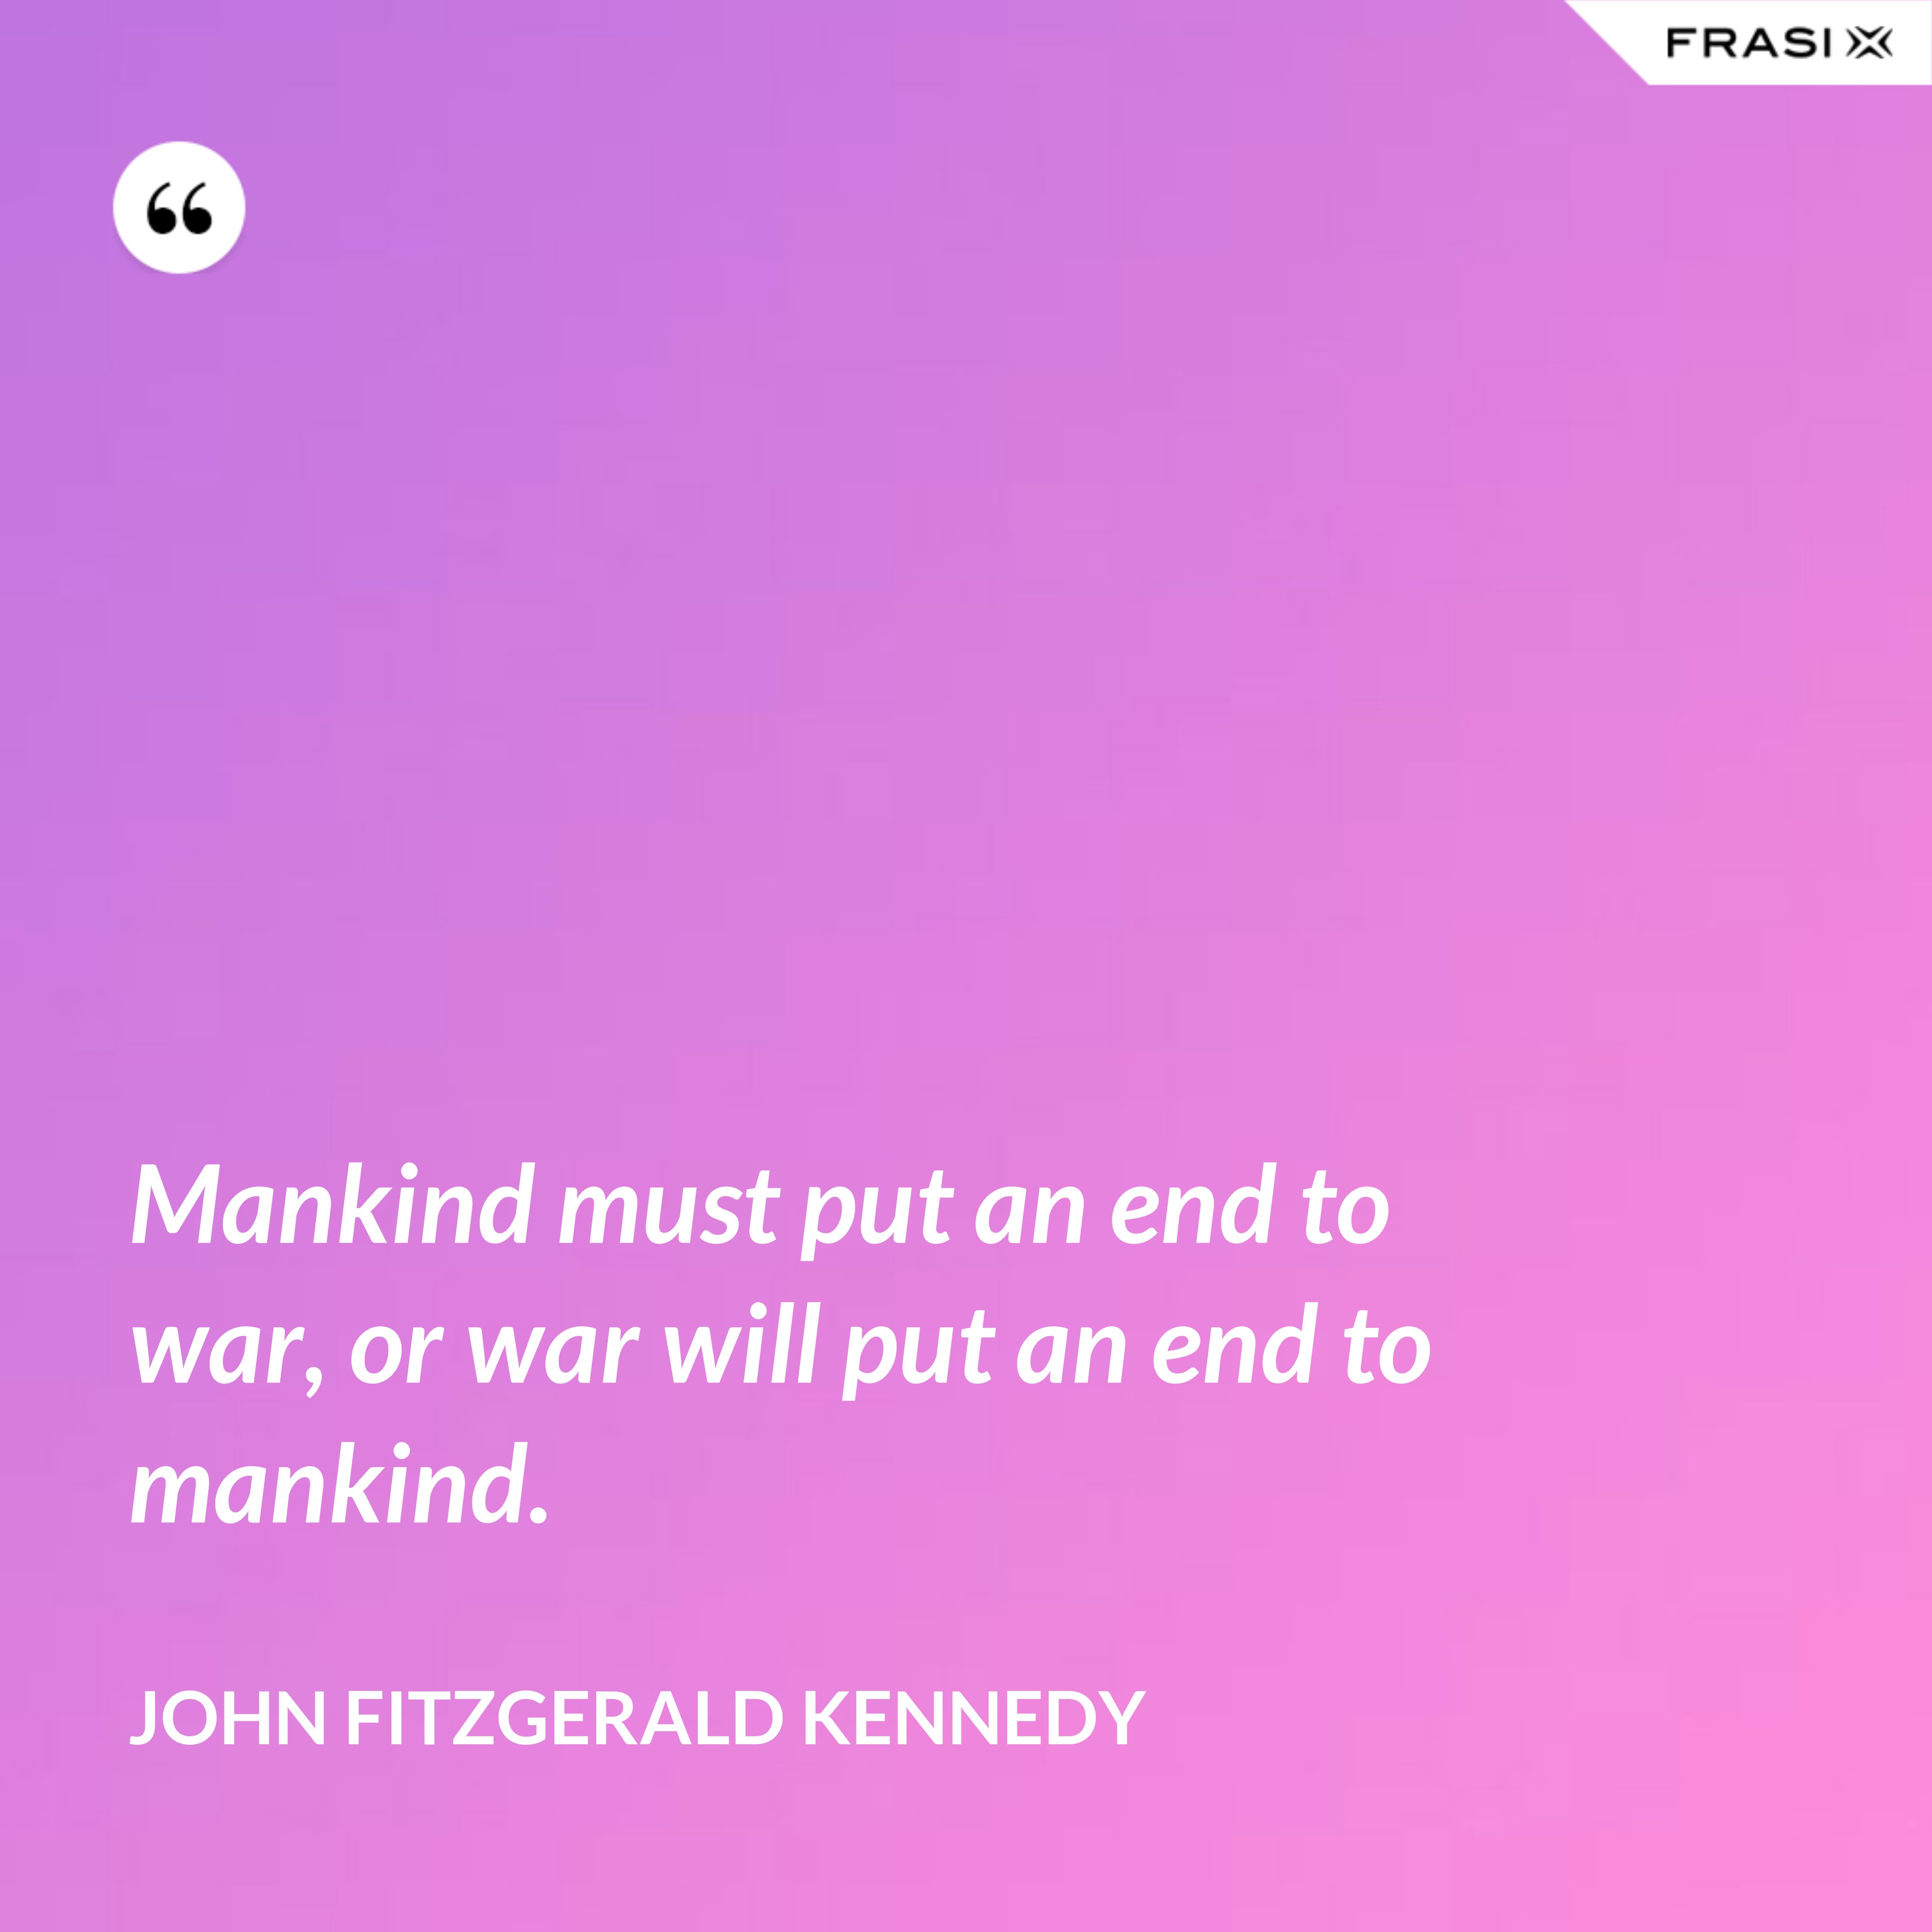 Mankind must put an end to war, or war will put an end to mankind. - John Fitzgerald Kennedy